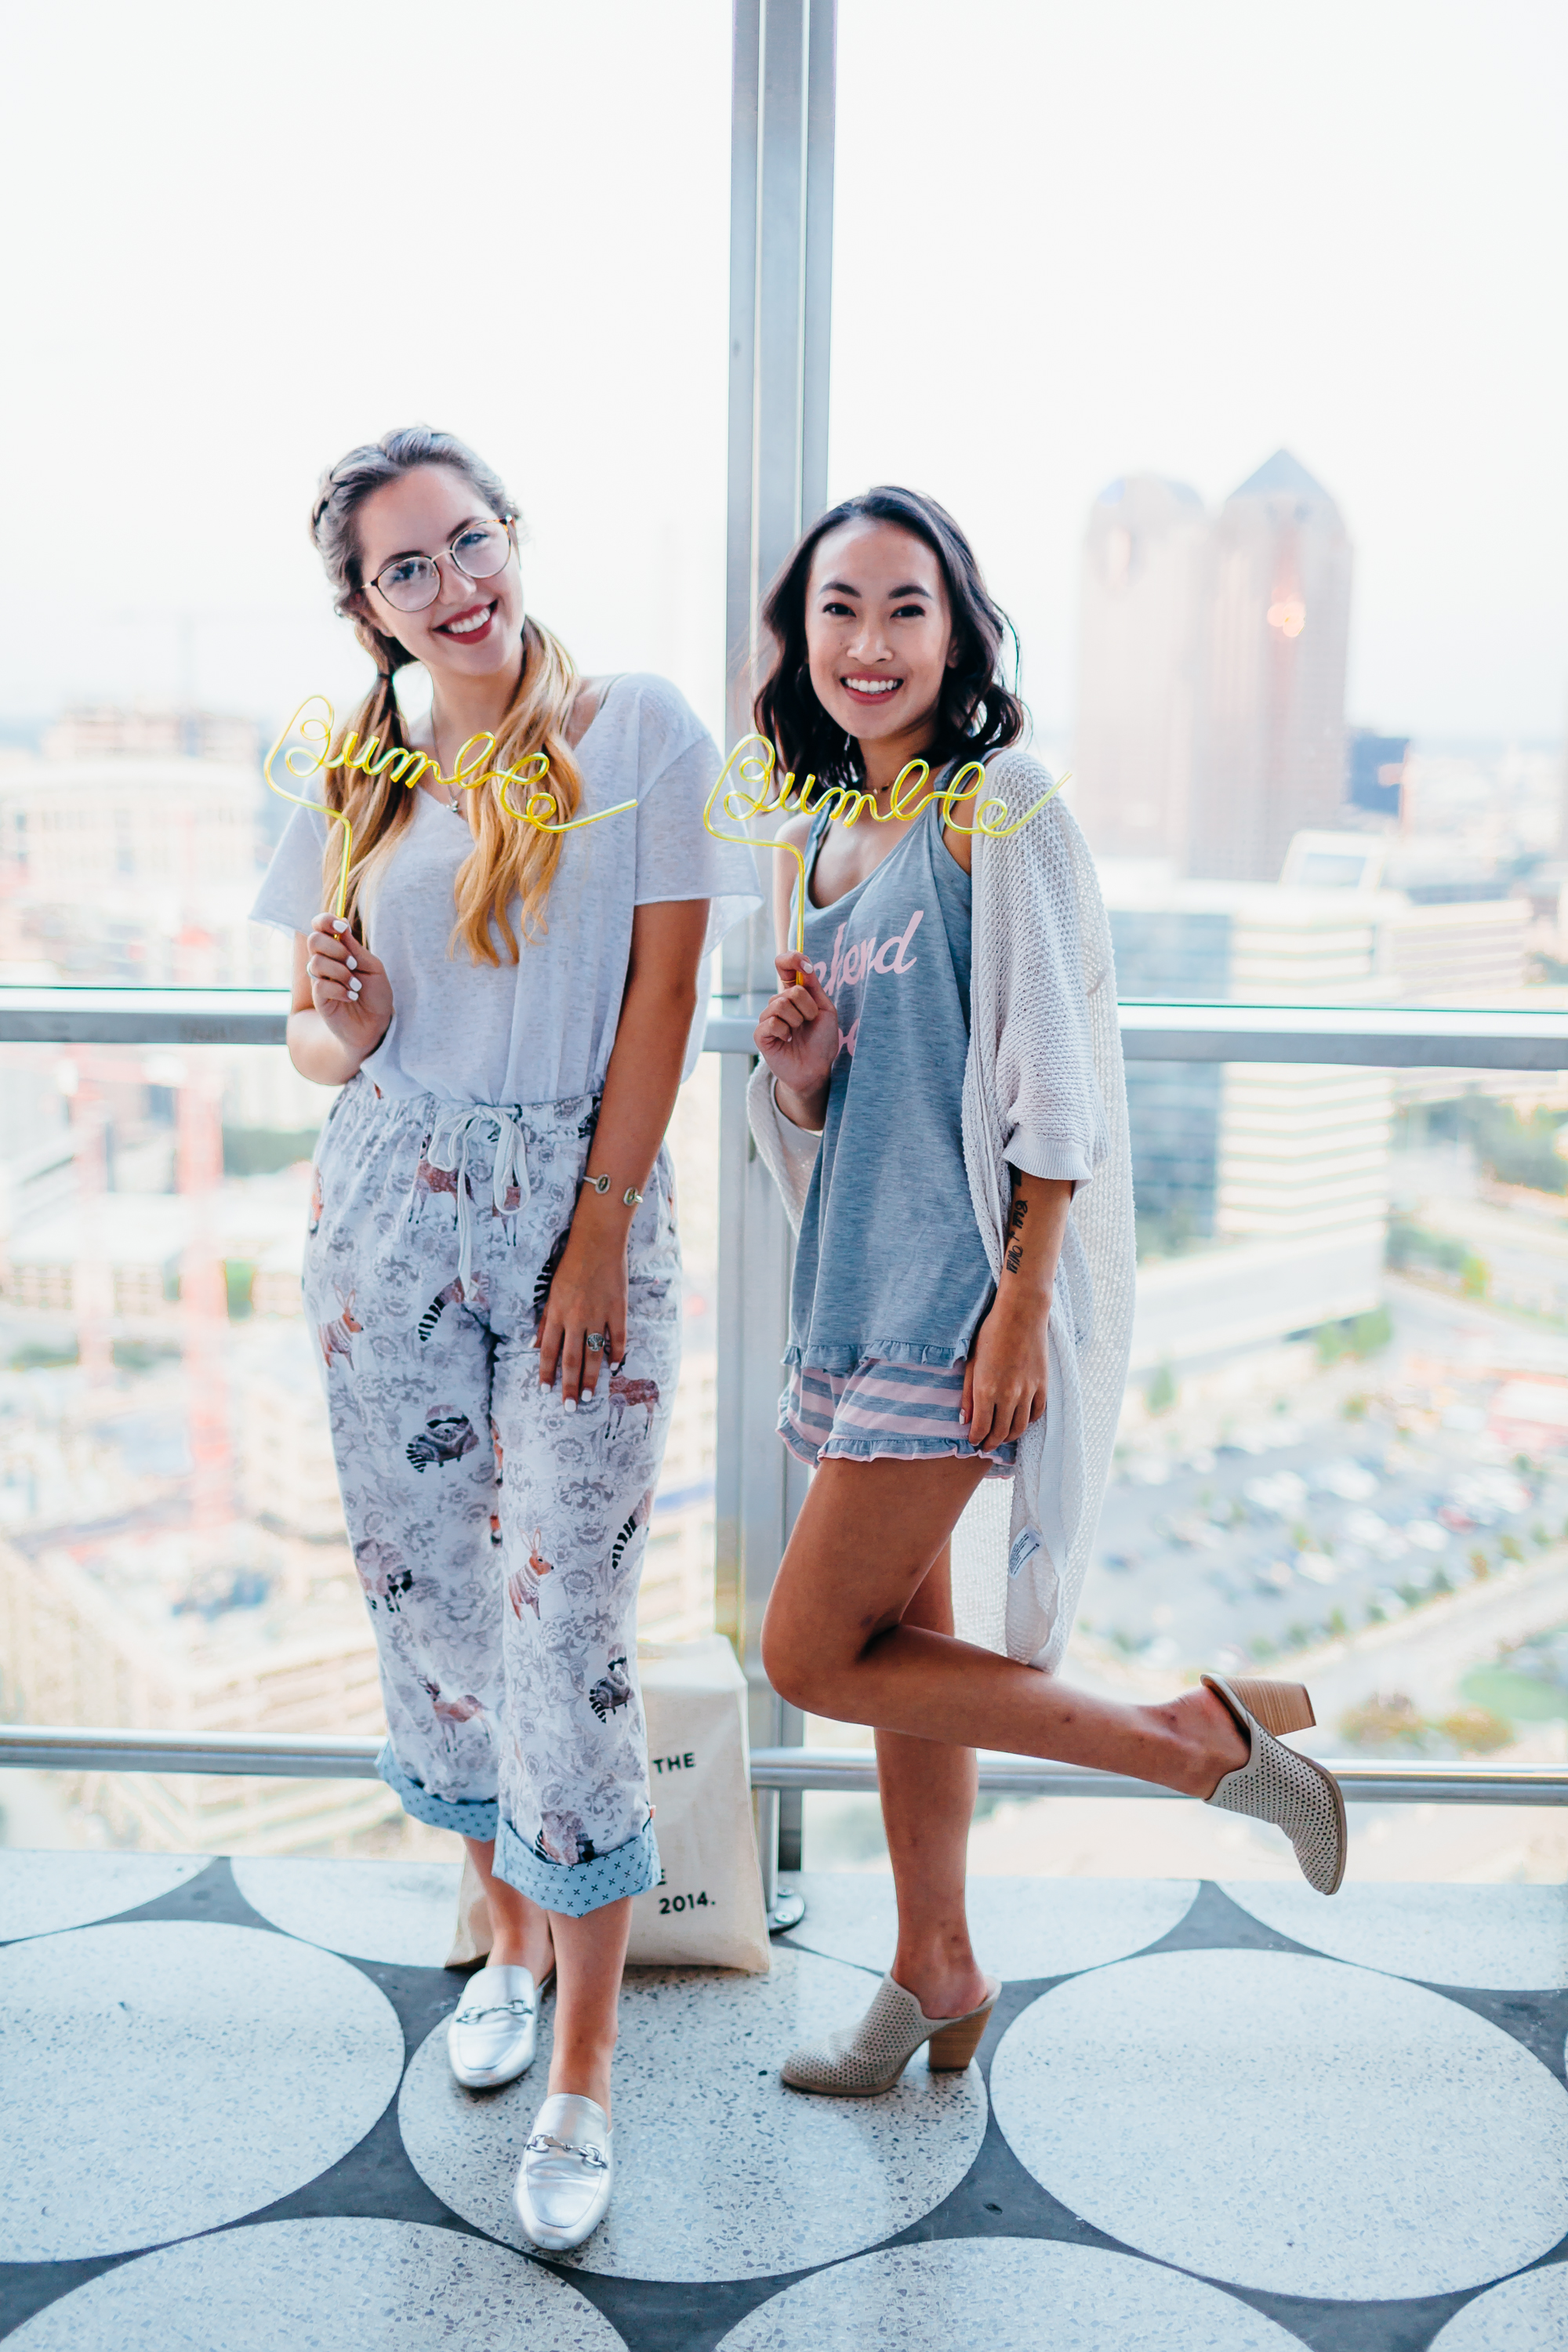 bumble-bff-dallas-launch-event-6466.jpg